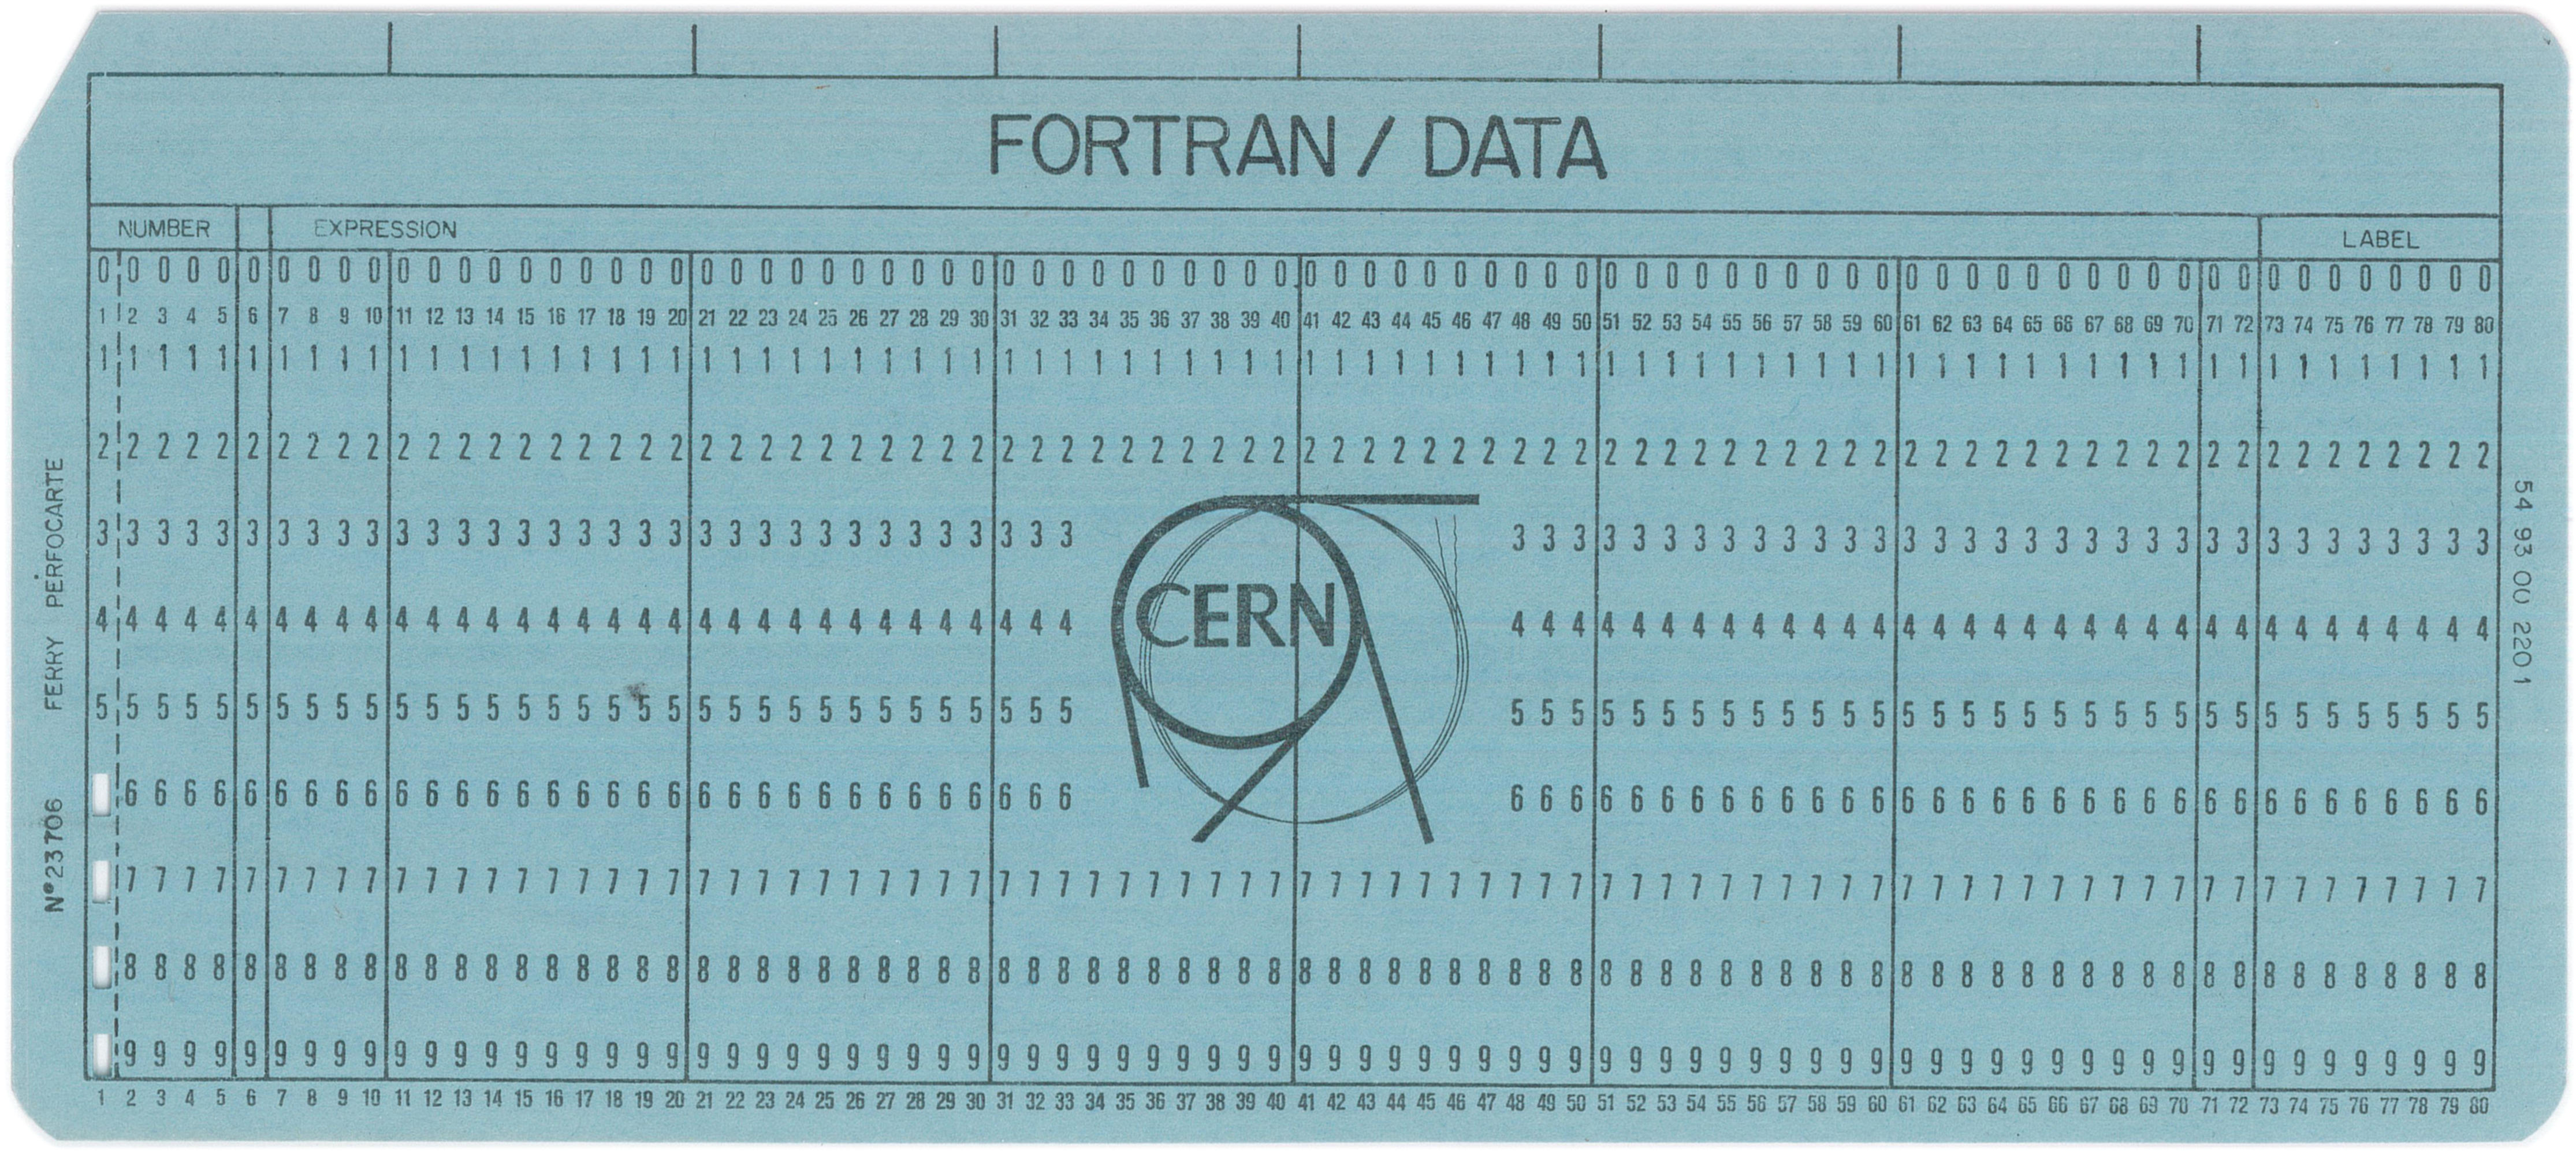 Douglas W. Jones's collection of punched cards for computer programs